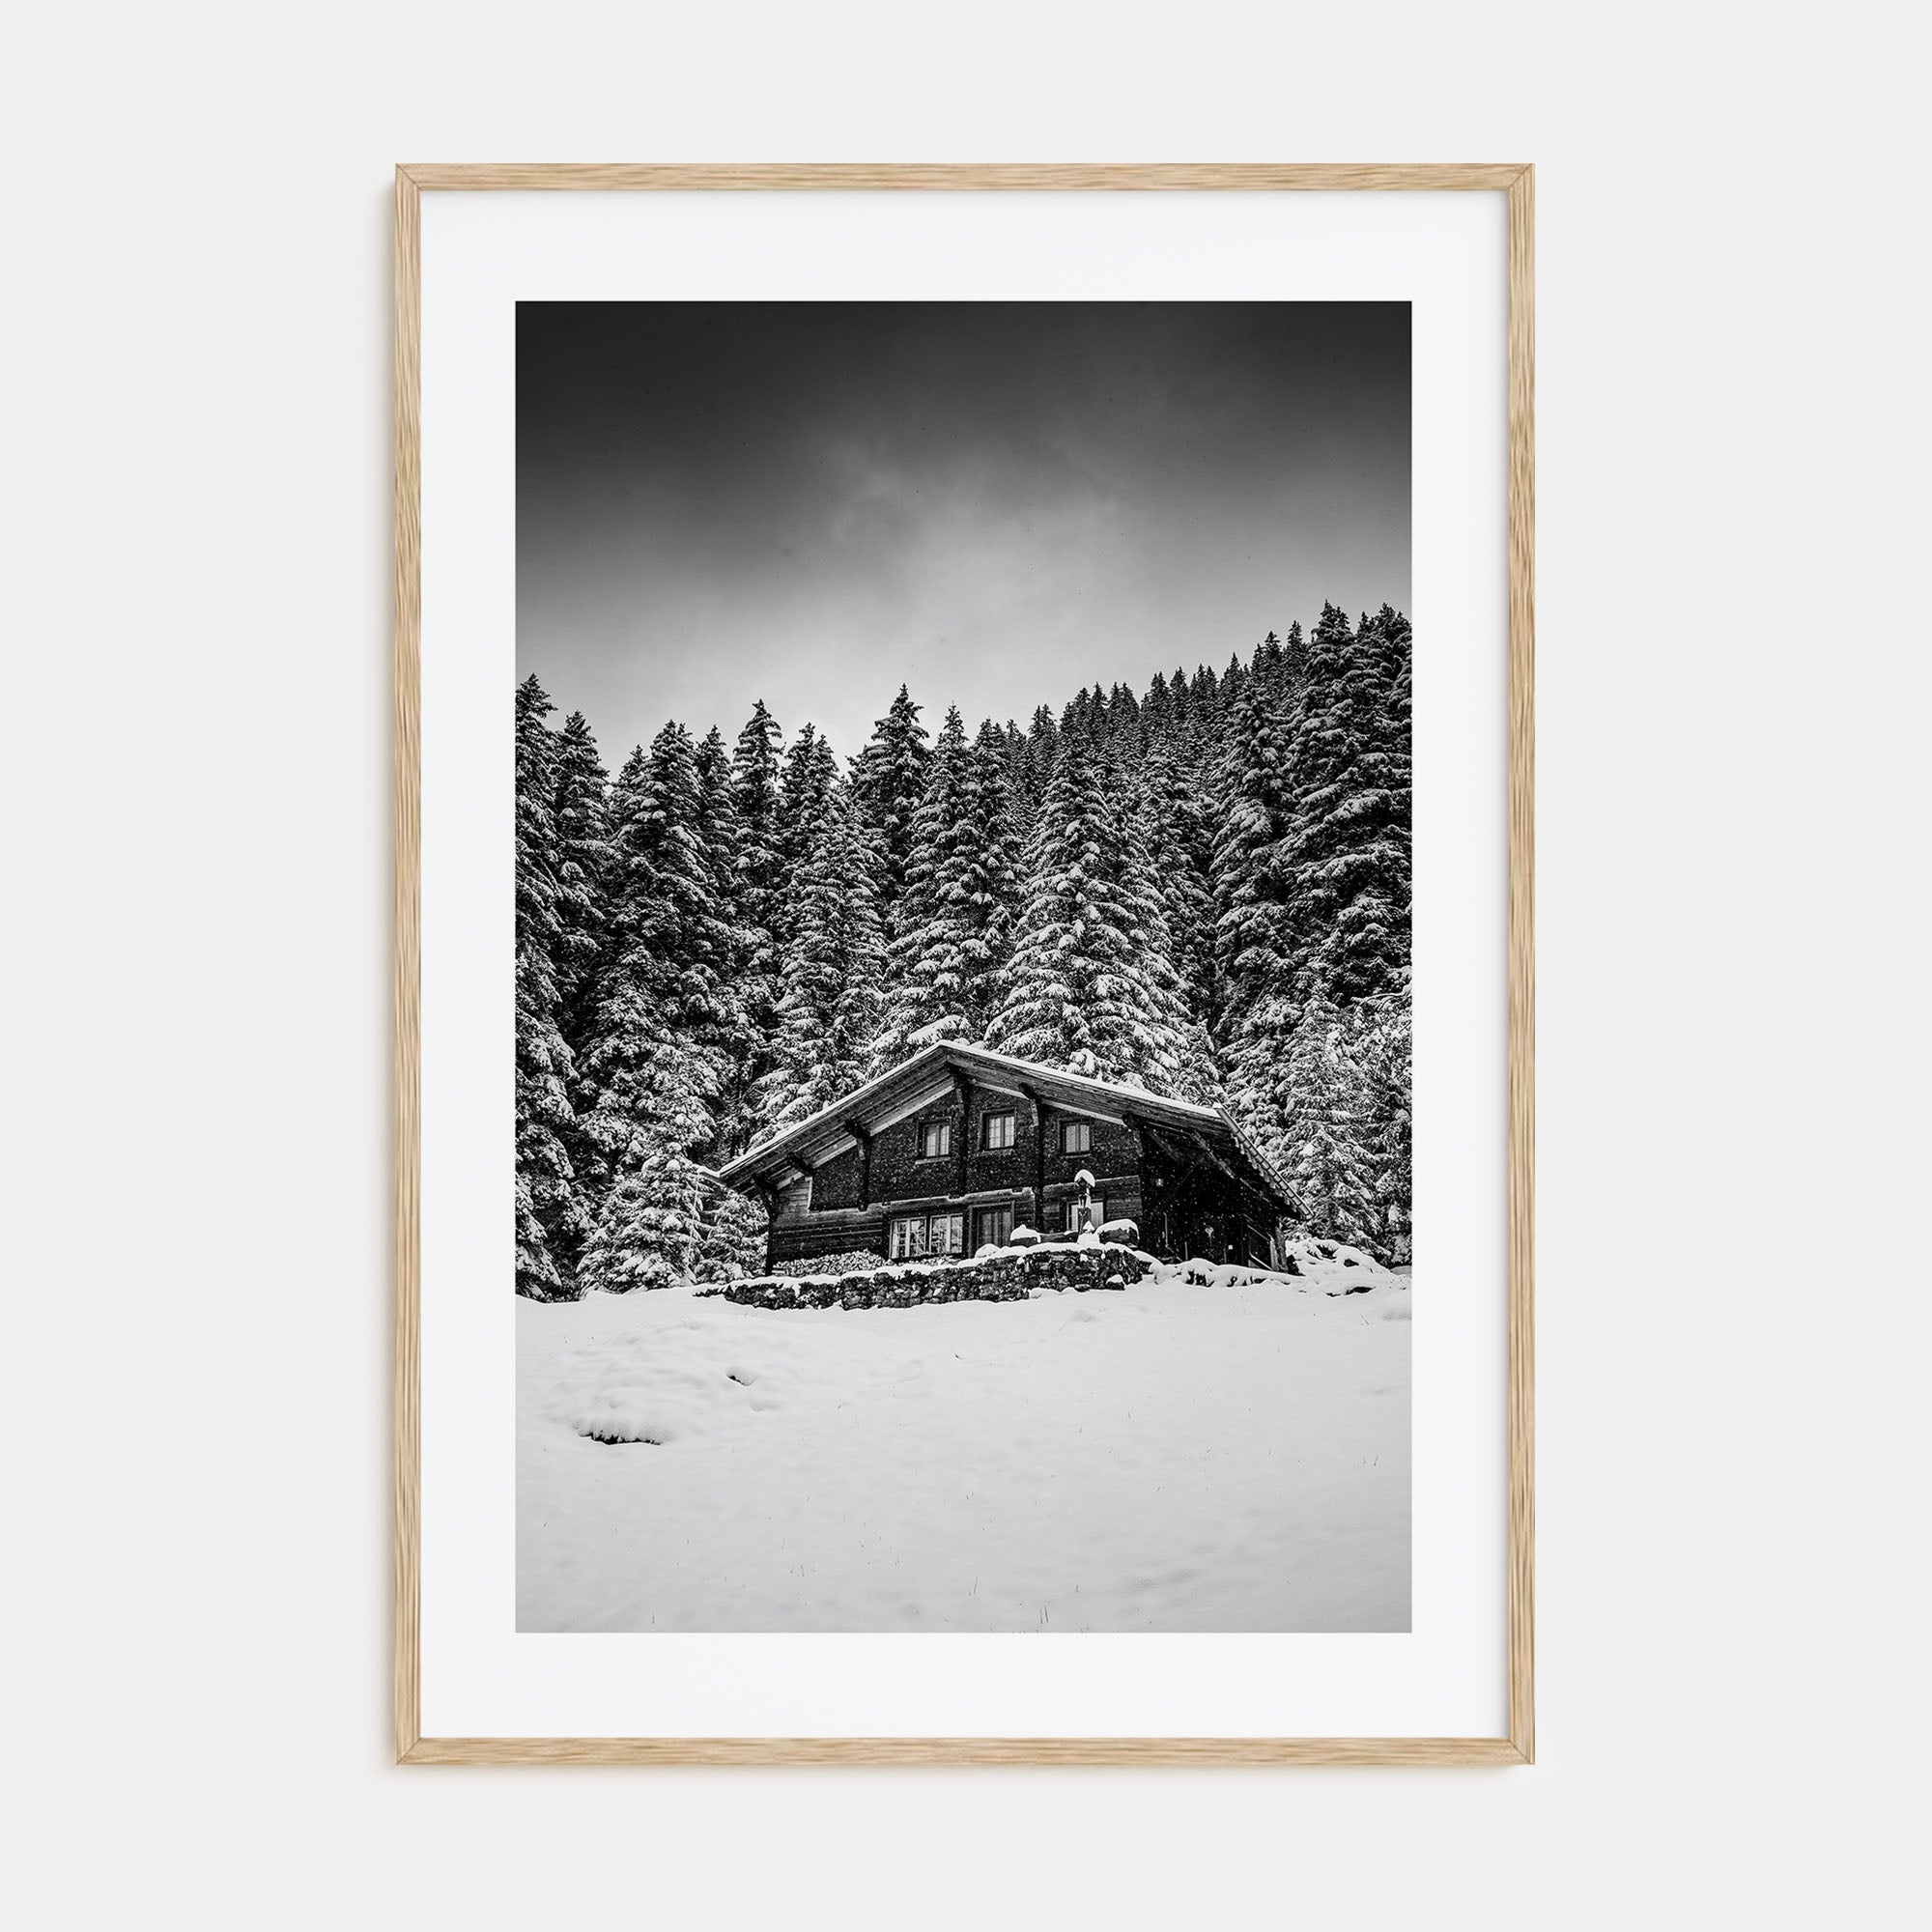 Wooden Cabin Logs Photo B&W No 3 Poster